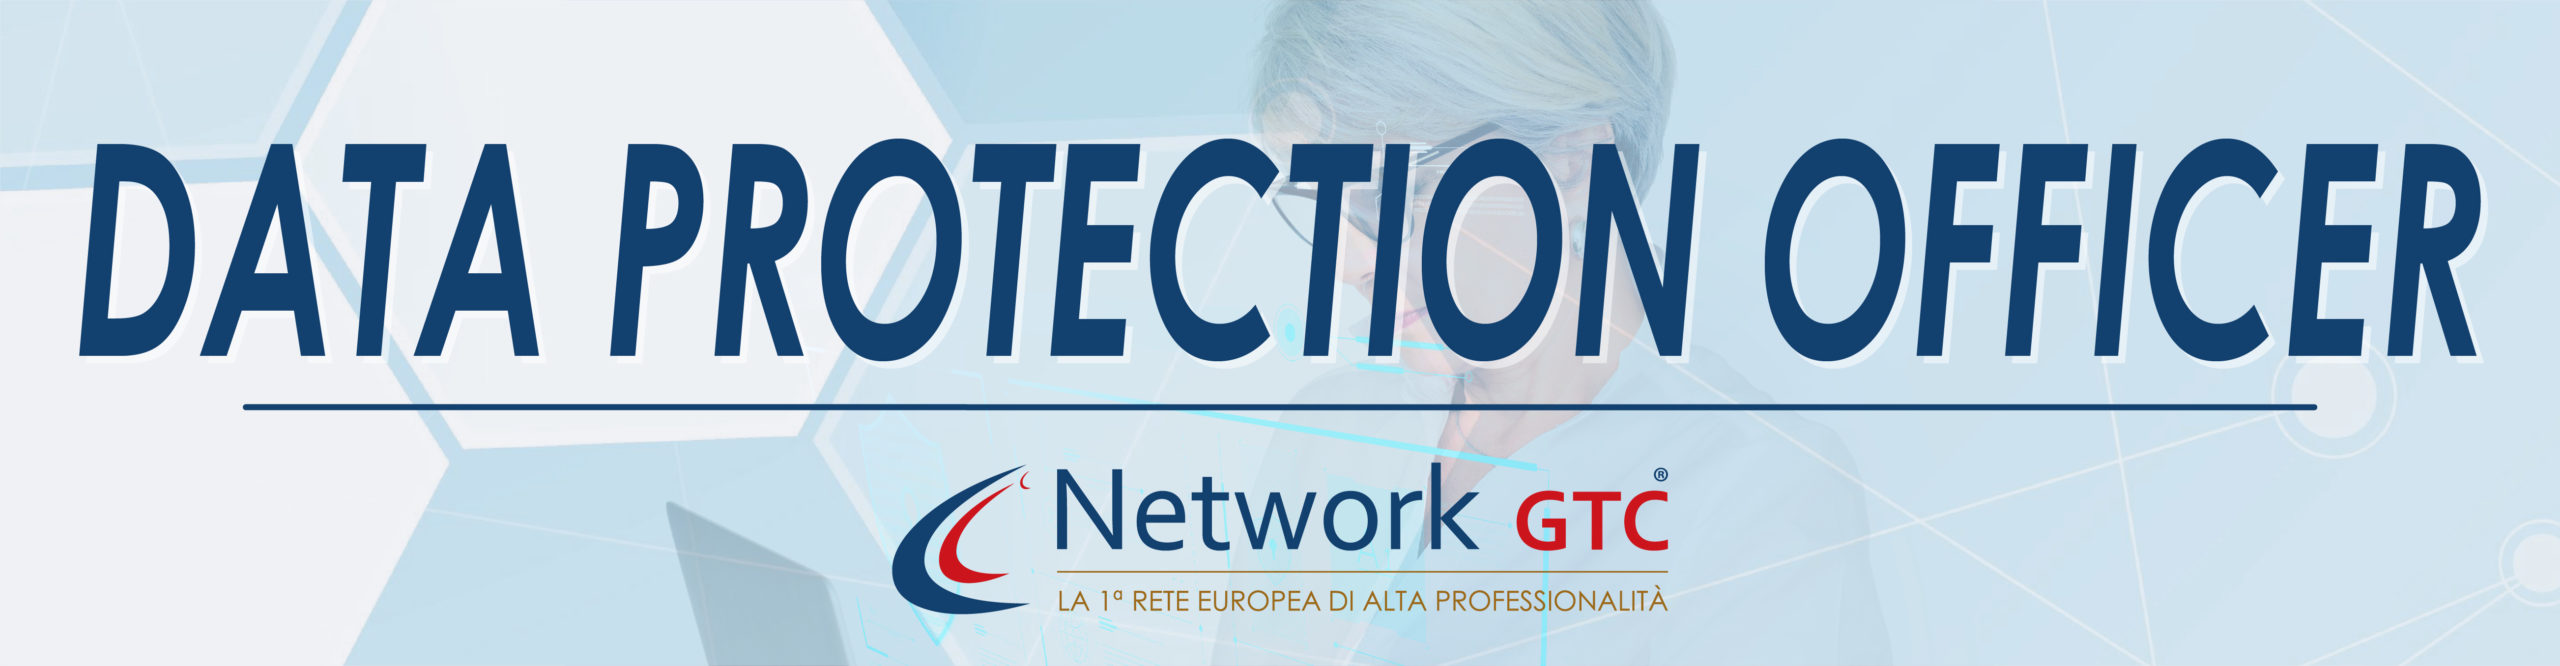 Network GTC - Certificazione DPO - data protection officer